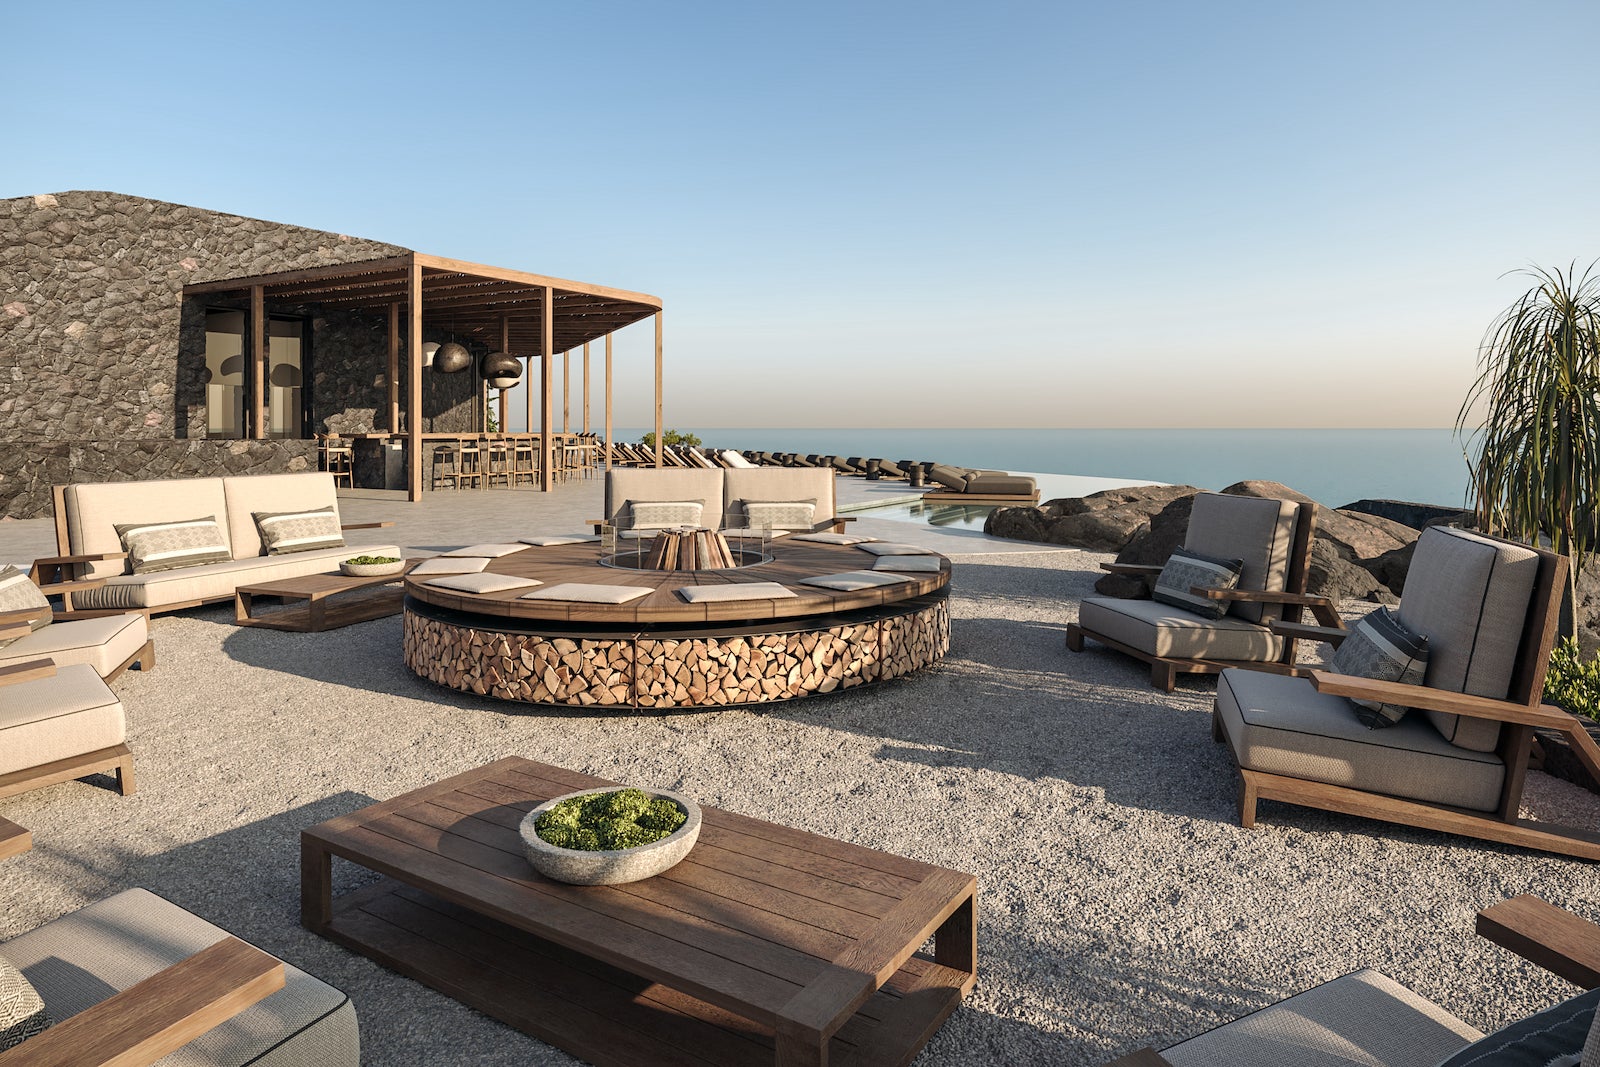 fire pit with chairs around it and view of the ocean